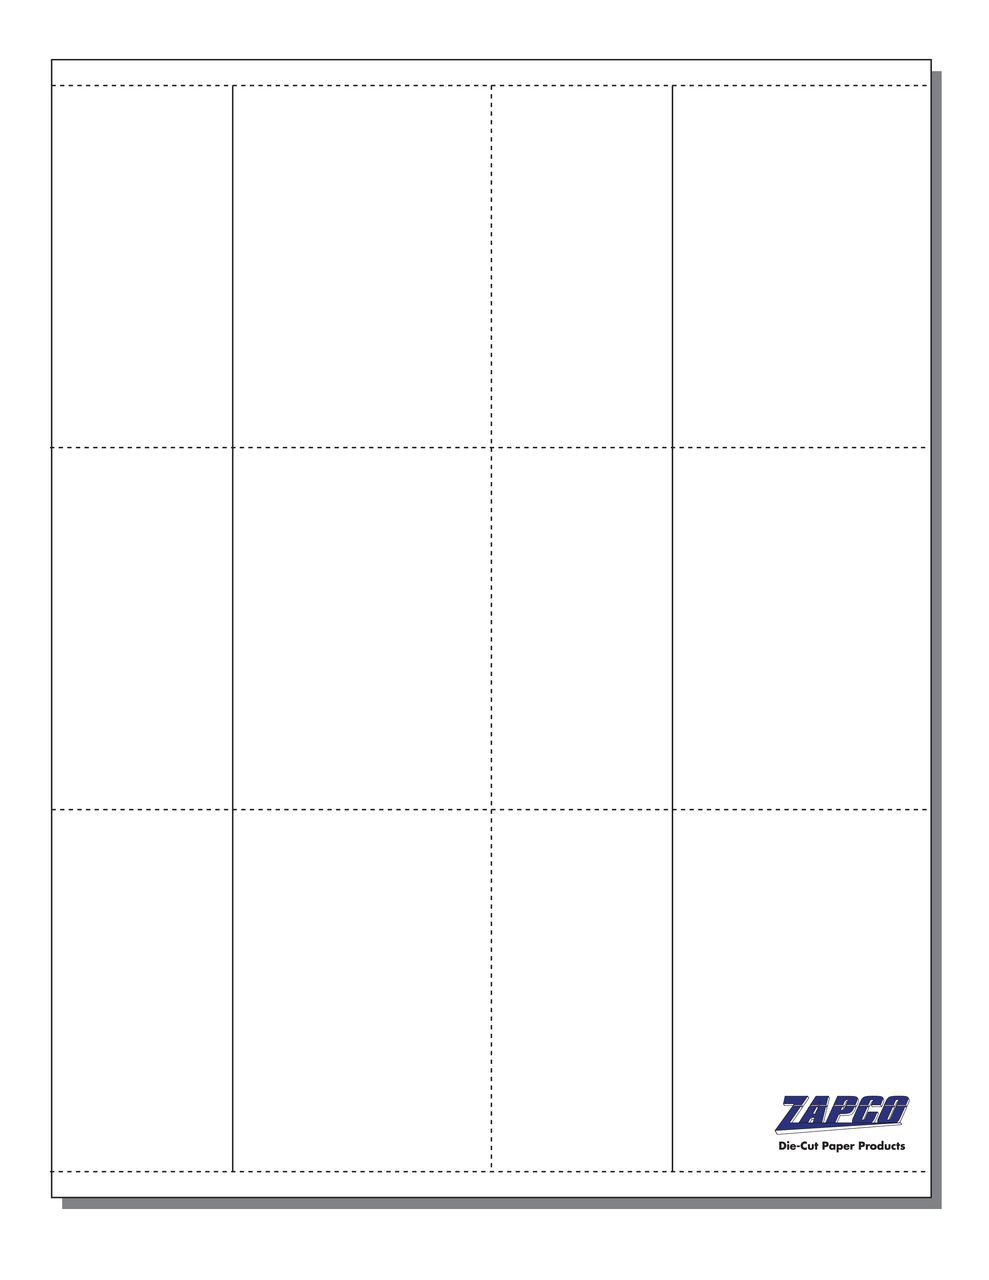 Item 598: 6-Up 2 1/2" x 1 2/3" x 3 1/2" Fold-over Business Card 8 1/2" x 11" Sheet(250 Sheets)